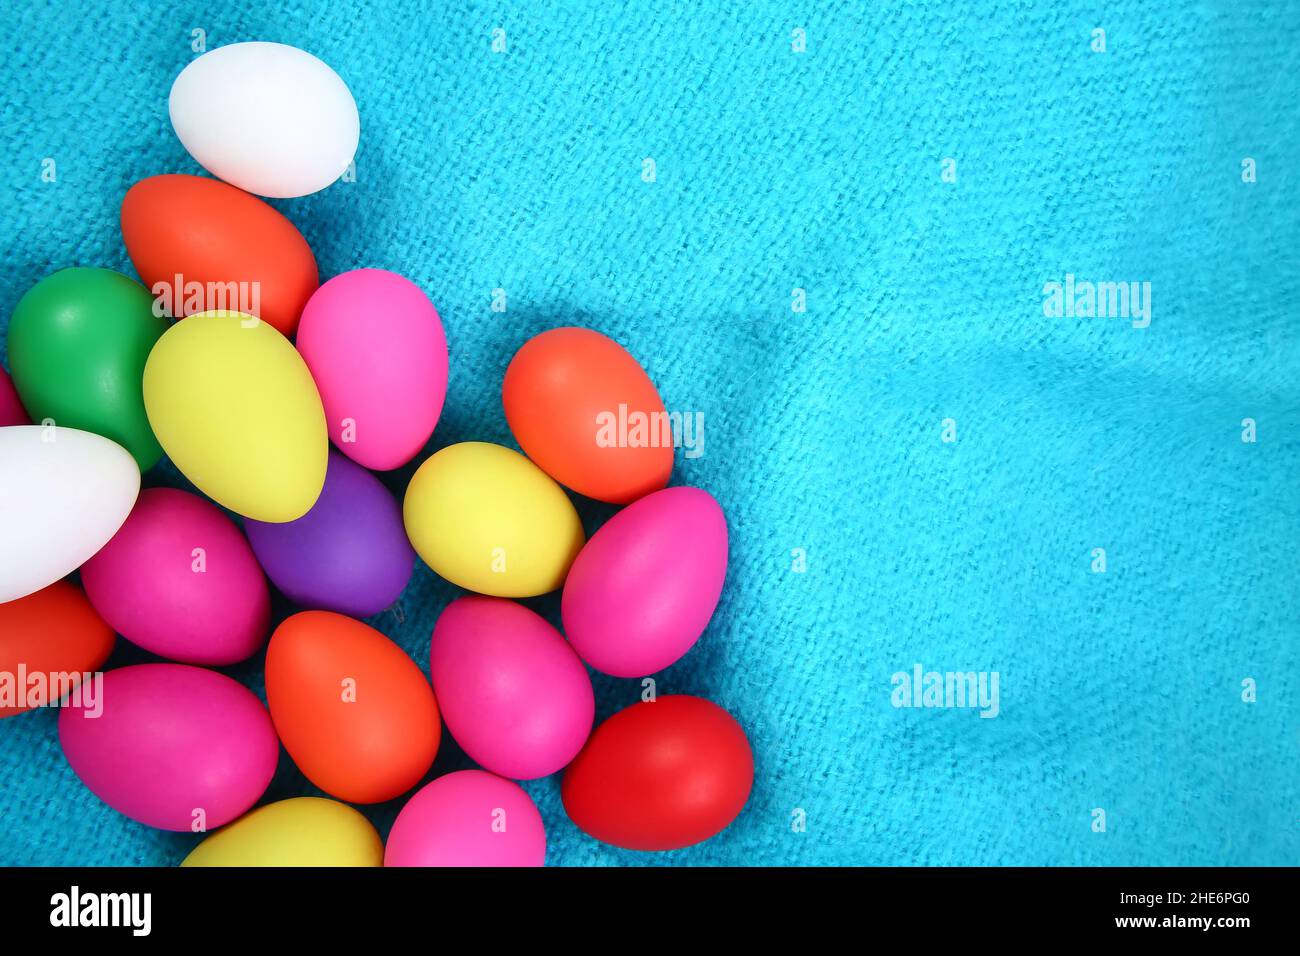 Multi colored painted easter eggs in pink, yellow, red, green, purple and white against a bright blue wool blanket background. Stock Photo